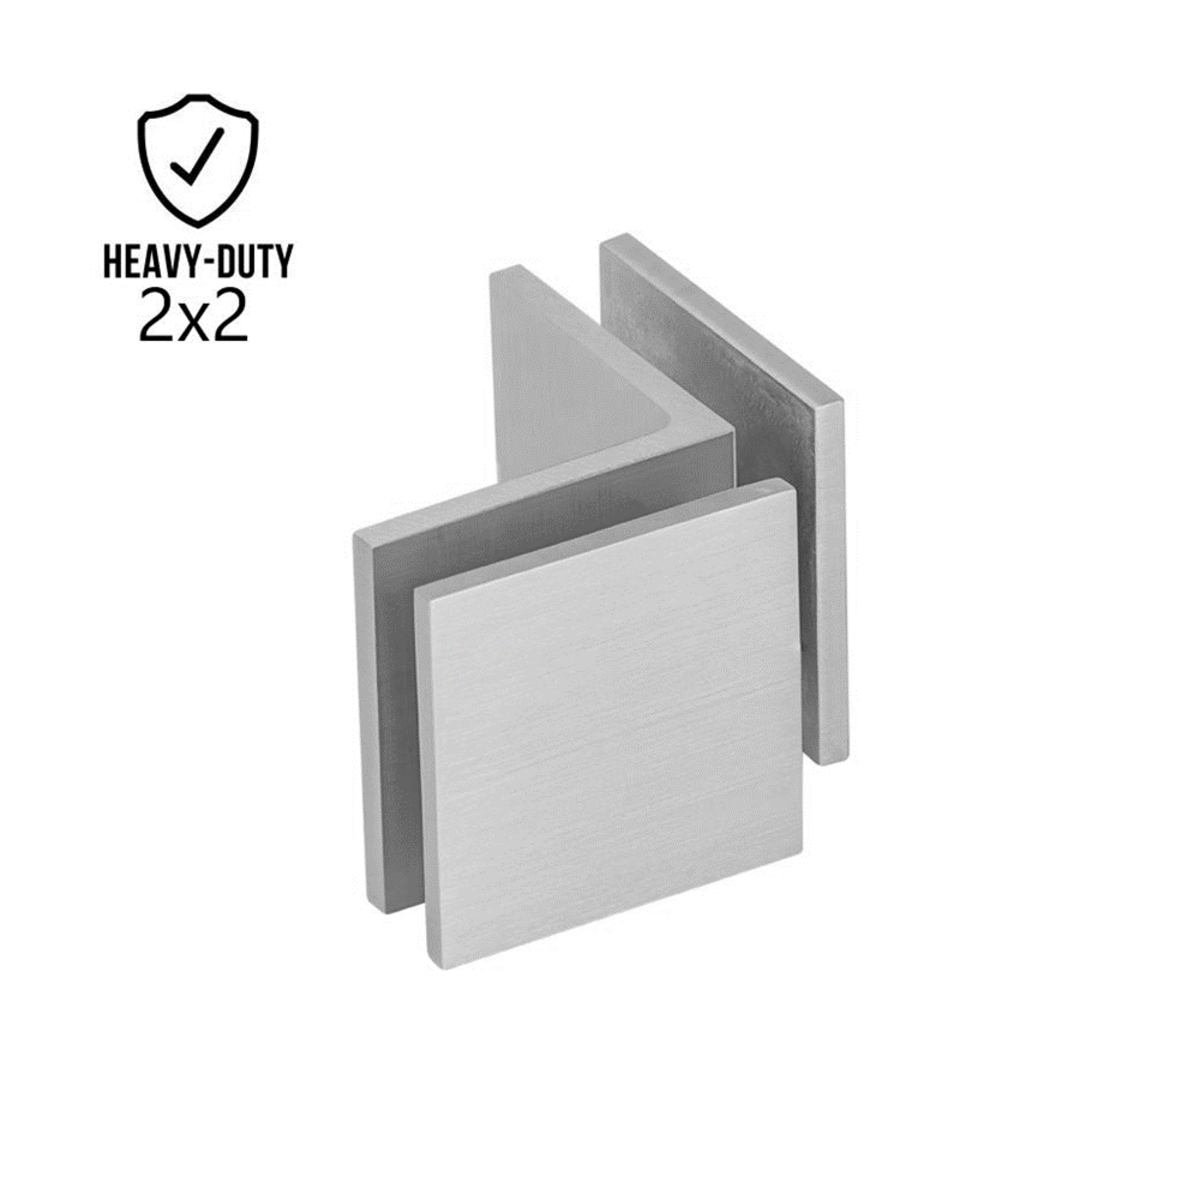 2" x 2" 90° Heavy Duty Glass to Glass Square Edges Glass Clamp